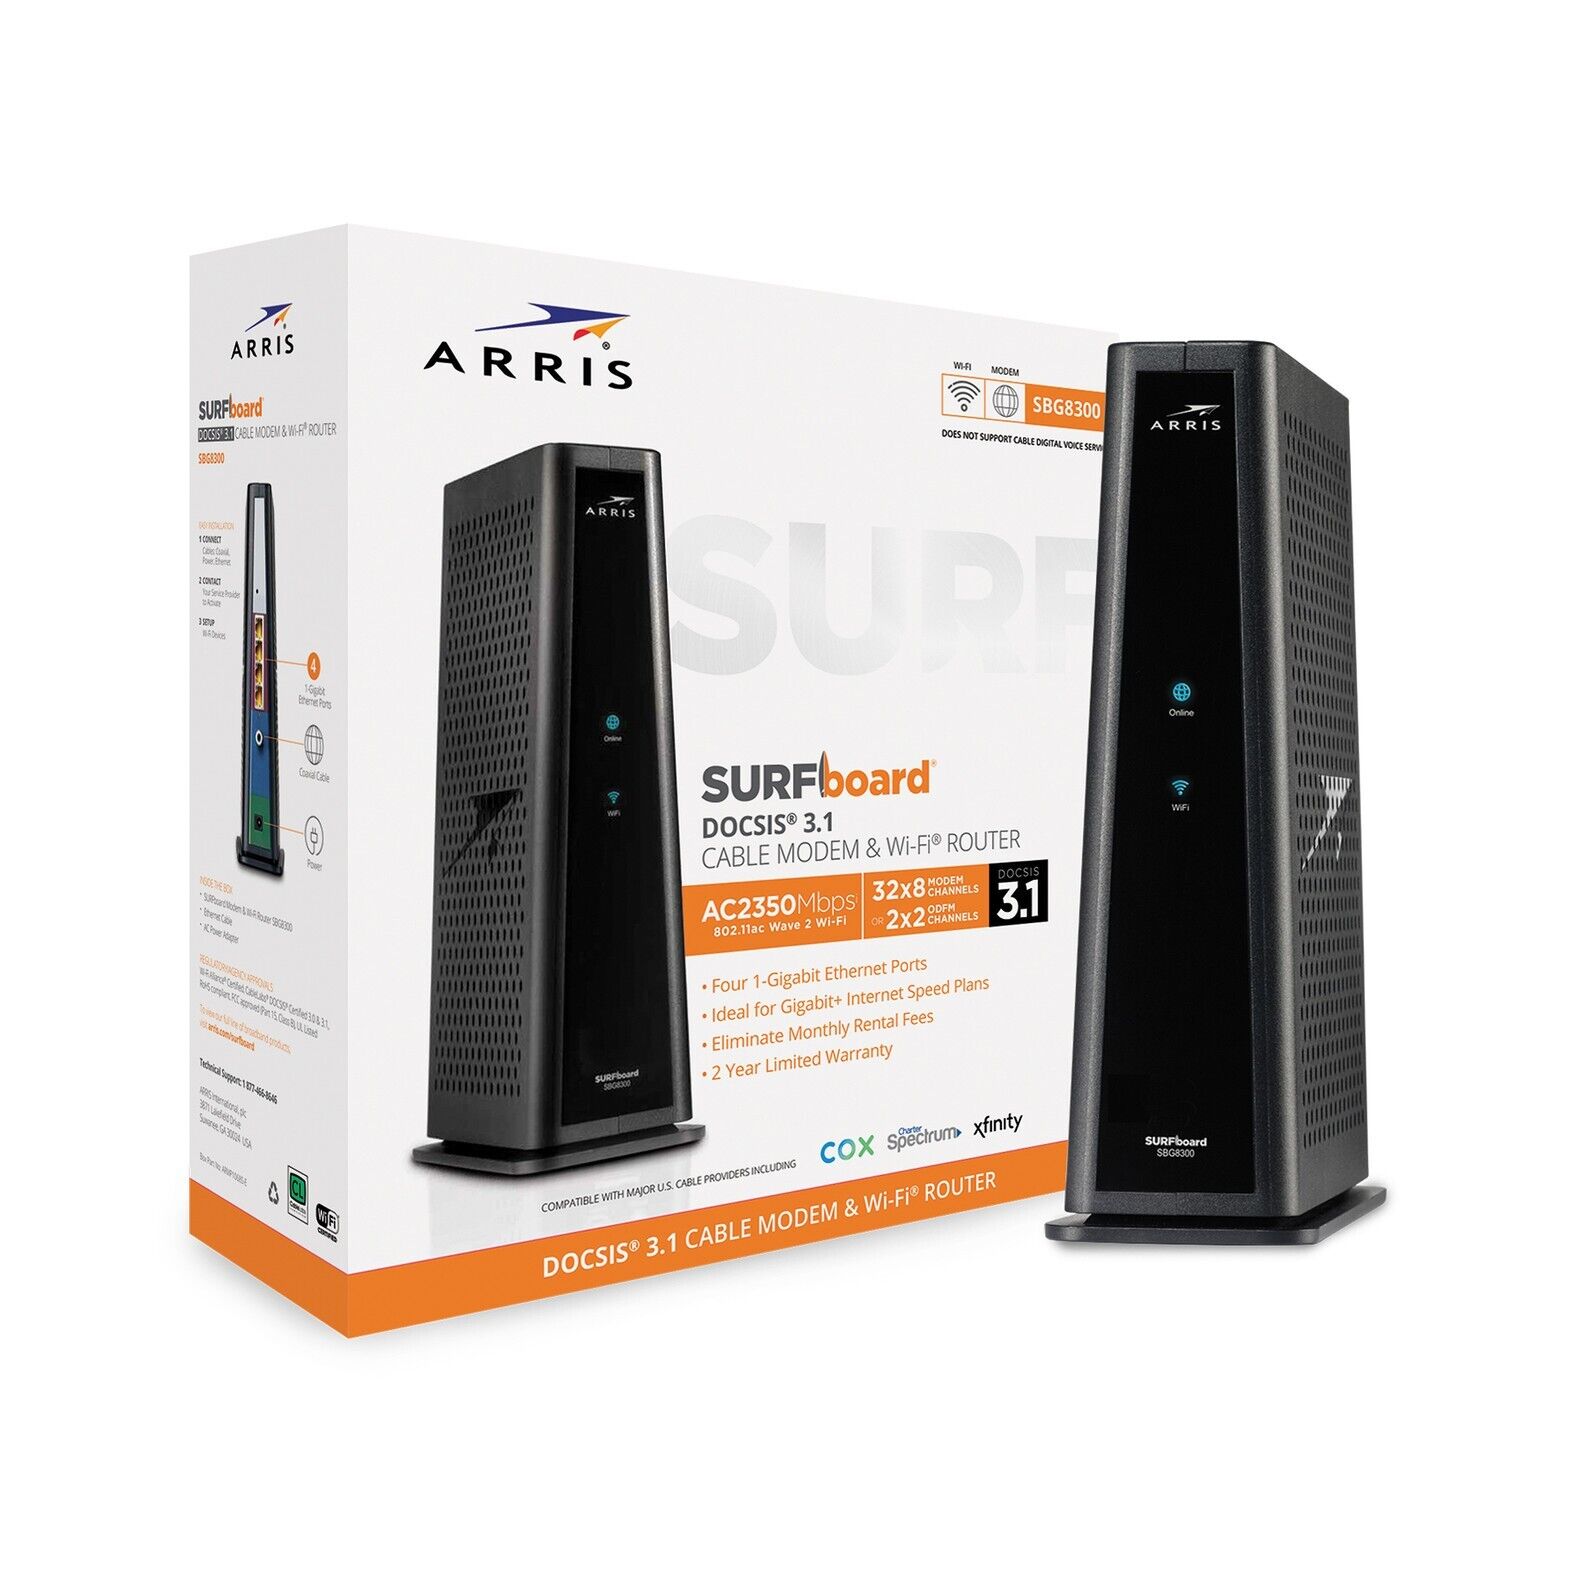 Arris SURFboard SBG8300 DOCSIS 3.1 Wireless Cable Modem & Dual-Band Wi-Fi Router Arris SBG8300